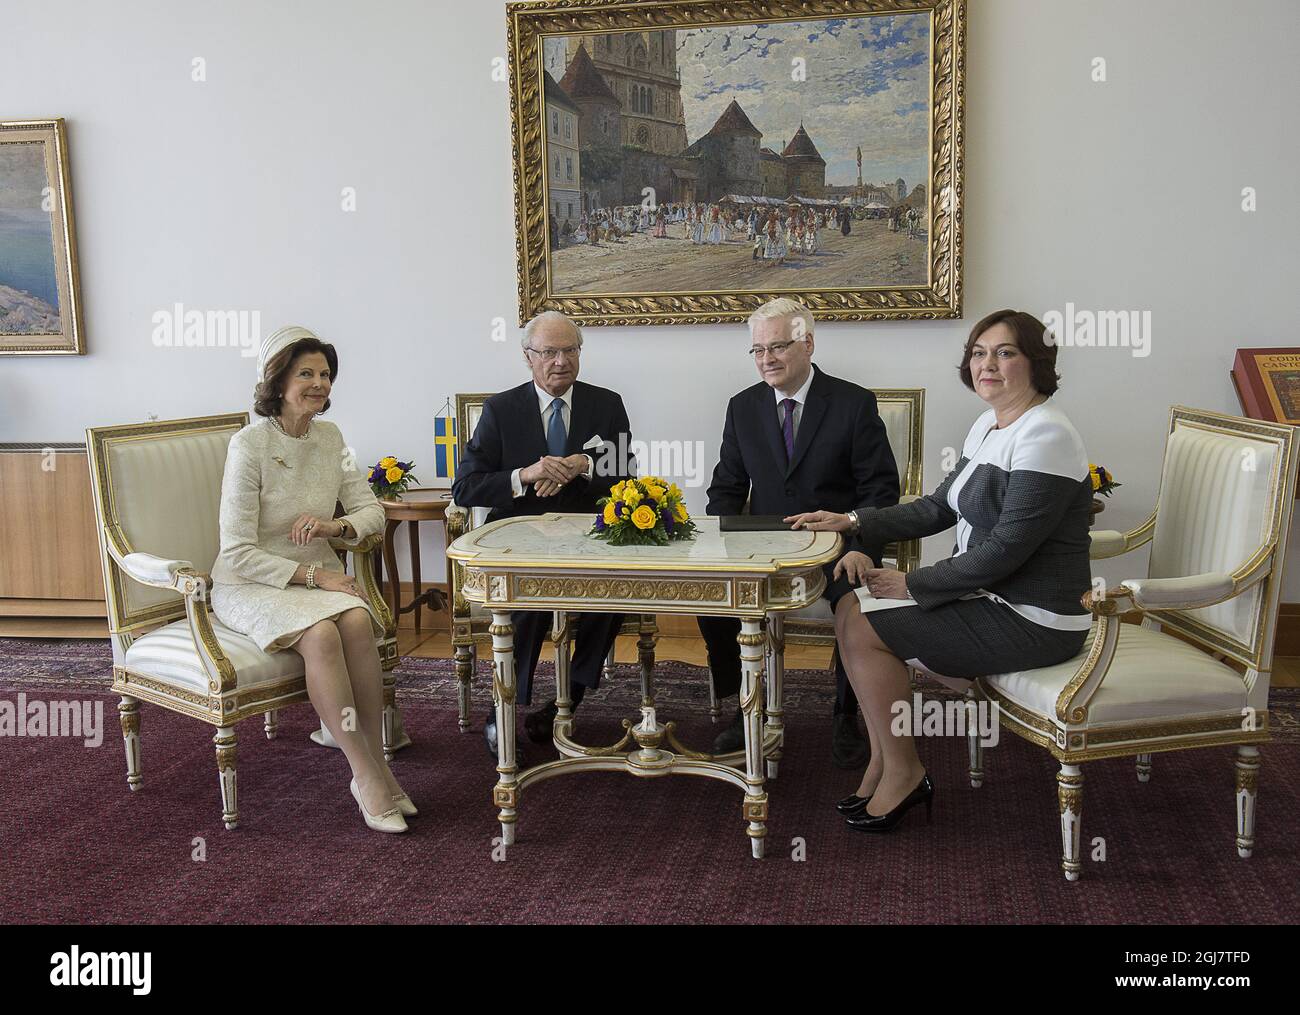 Swedish Queen Silvia, King Carl Gustaf, Croatia's President Ivo Josipovic and Professor Tatyana Josipovic at the Pantovcak Presidential Palace in Zagreb, Croatia on April 16, 2013. The Swedish King and Queen are on a three-day official visit to Croatia.   Stock Photo